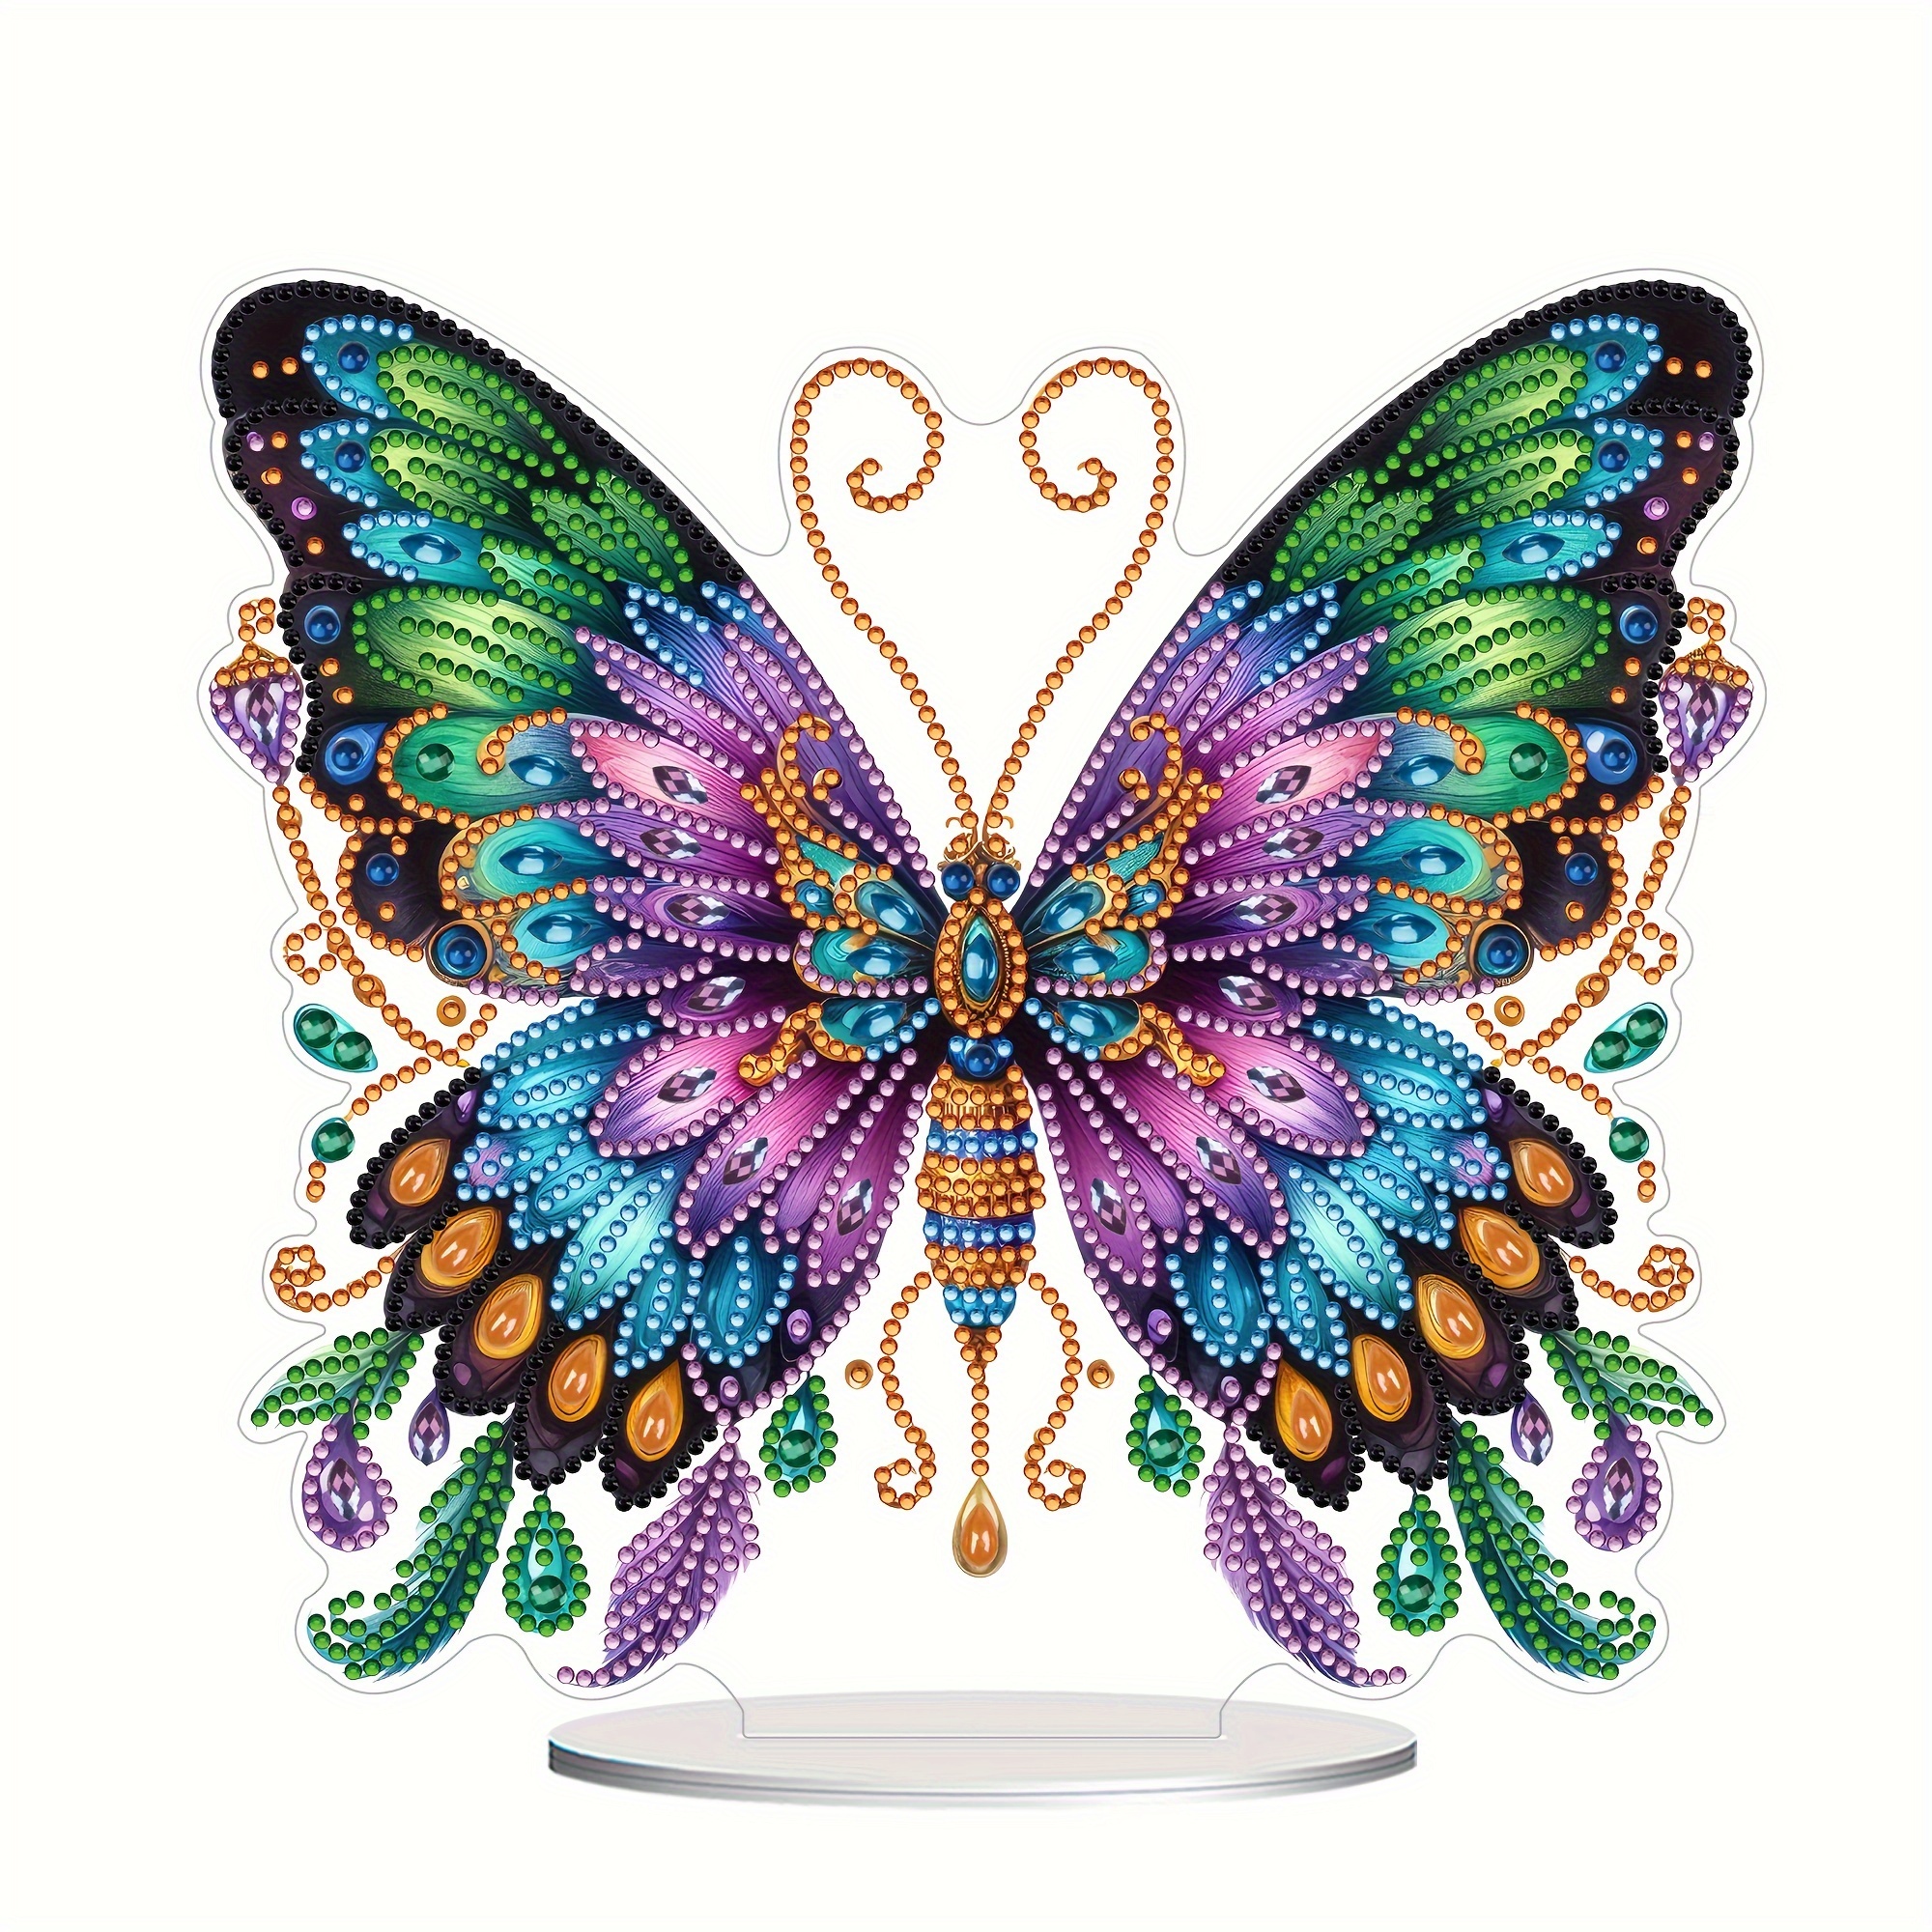 

elegant" Diy Acrylic Diamond Art Kit - Gorgeous Butterfly Design With Unique Shaped Diamonds, Perfect For Desk Decor & Craft Enthusiasts, Home Decoration Gift